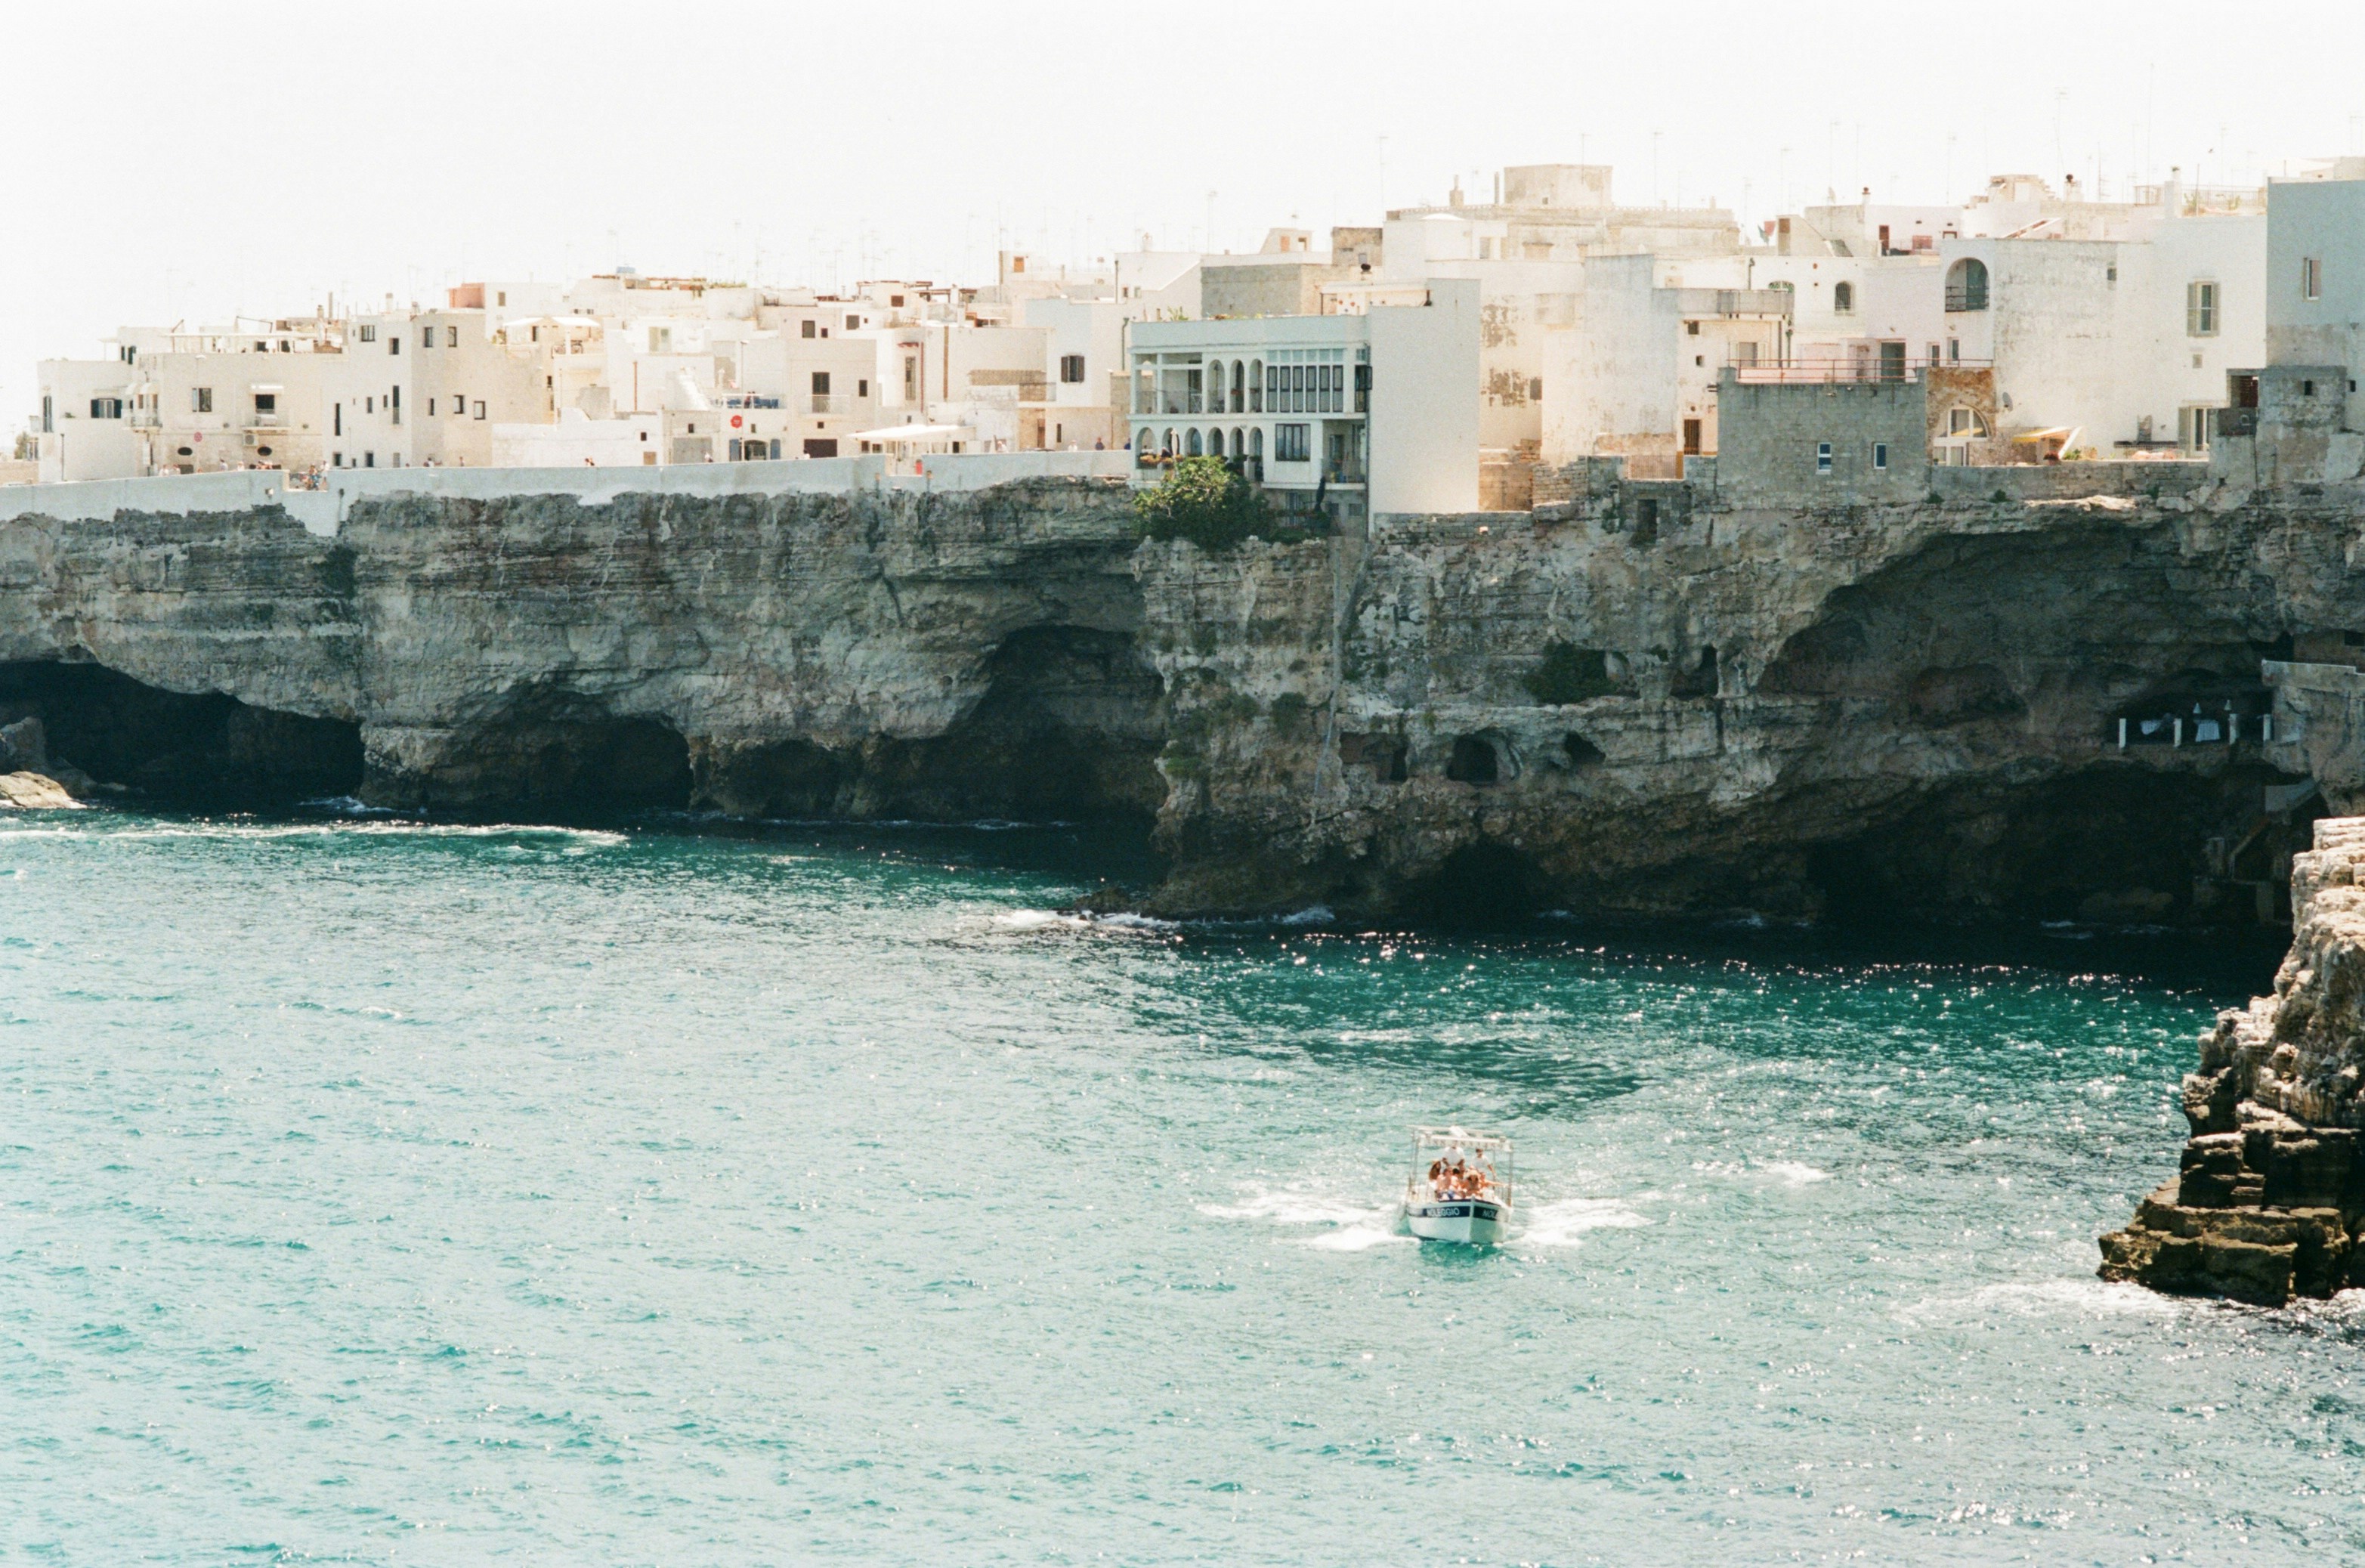 //Shot on expired Kodak Gold Film While developing the film, I asked the lab to push a bit the film to give this golden hour feel to the water and to separate the white houses from the sky. They remind of Greece, don’t they? But this is the south east of Italy in the Puglia region. A part of Italy forgotten by time, and by the rest of the country…